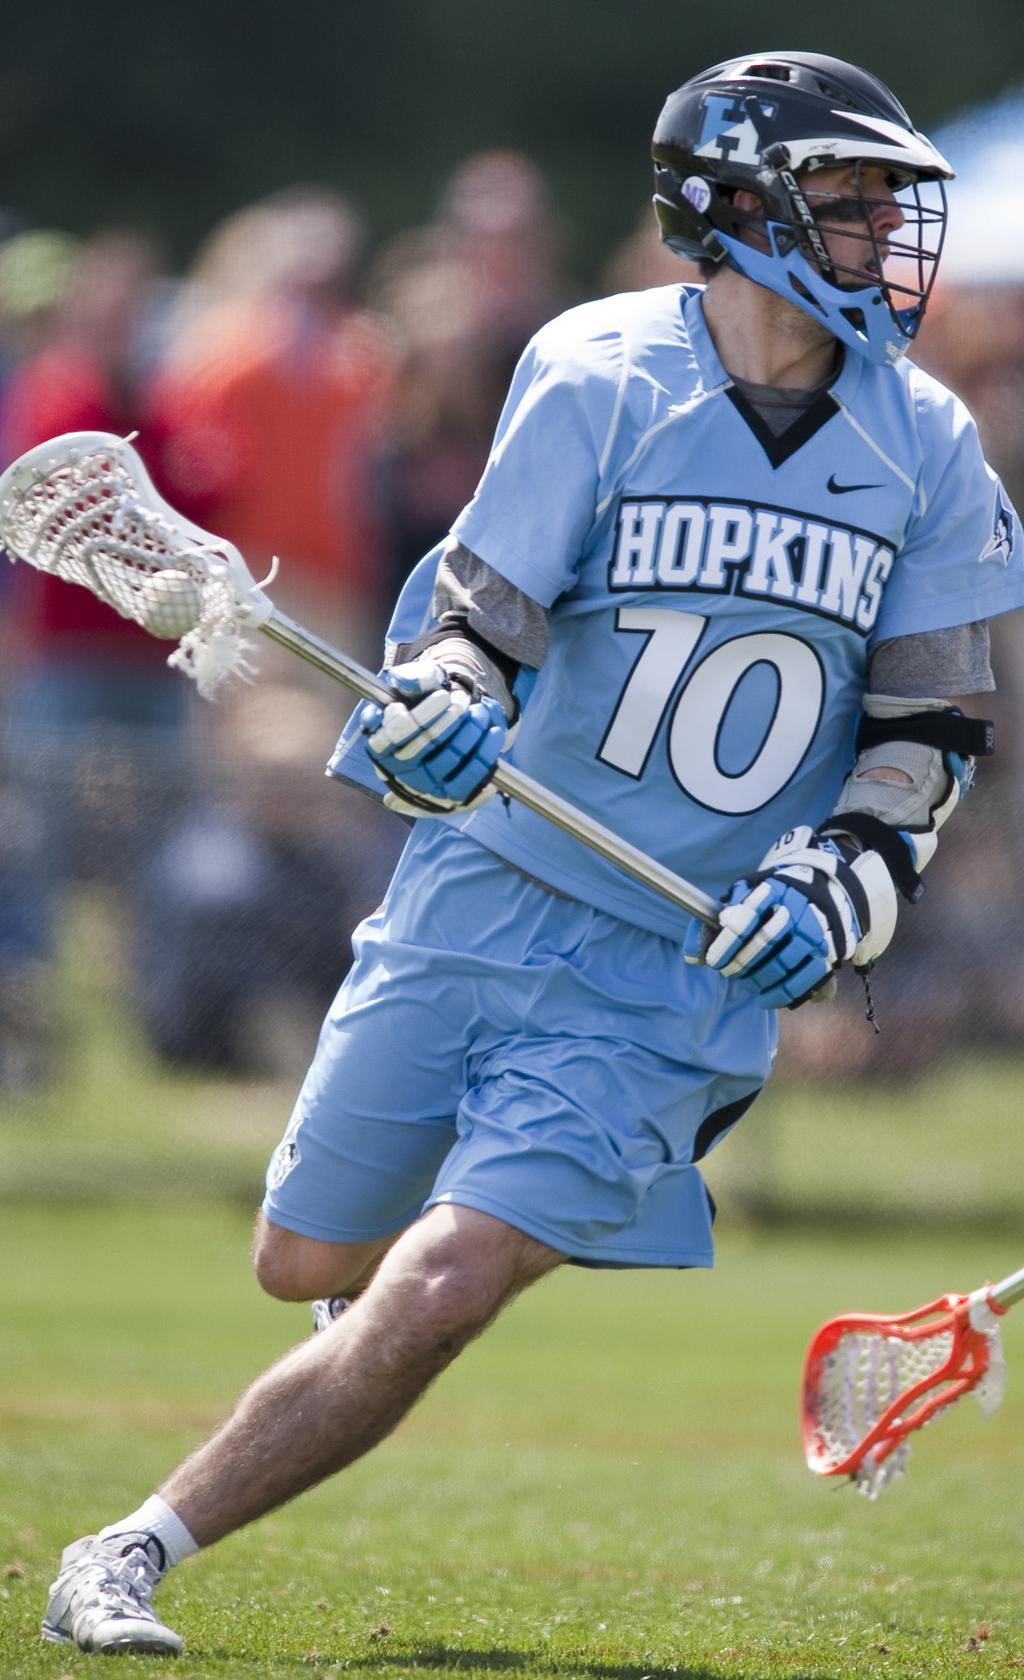 Position Tradition - Johns Hopkins has had at least one attackman earn All-America honors every year since 1992.